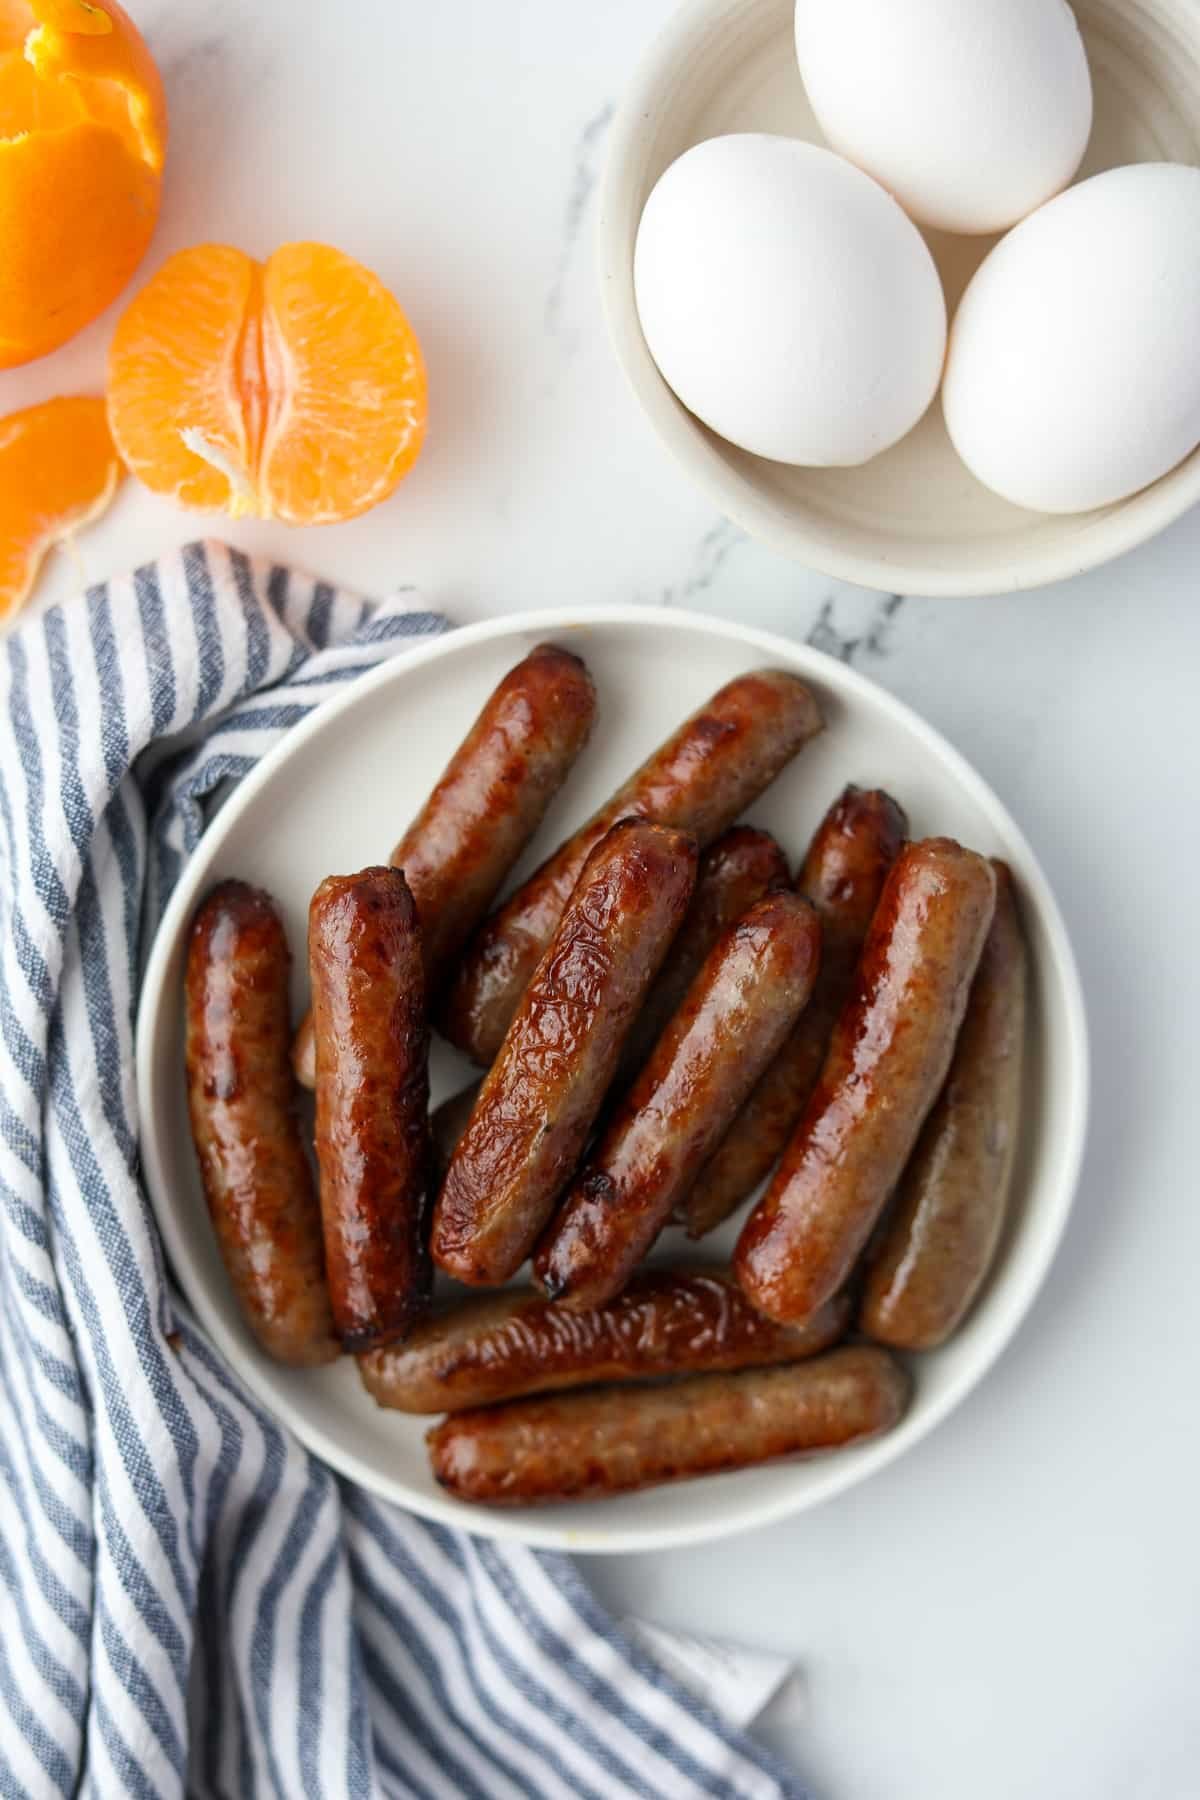 A plate of cooked breakfast sausages on a marble counter.